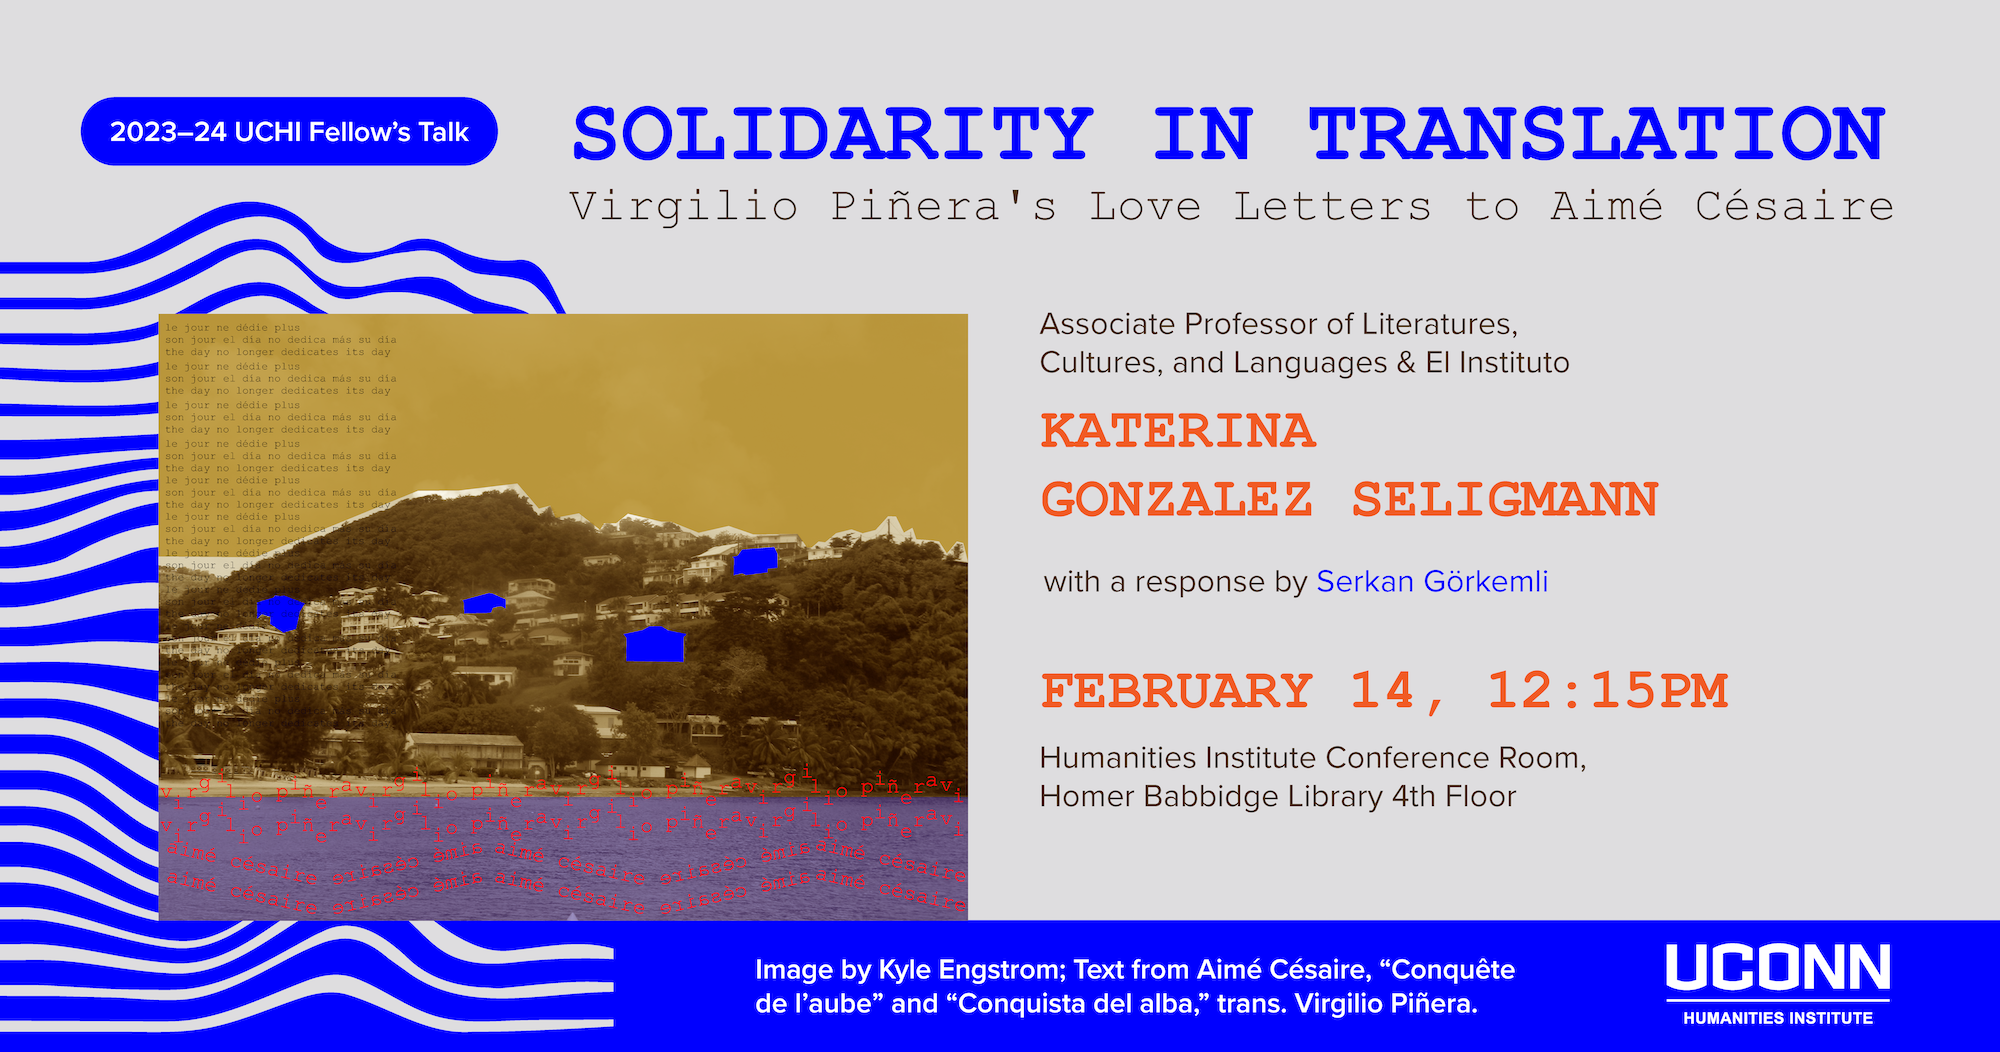 2023–24 UCHI Fellow's Talk. "Solidarity in Translation: Virgilio Piñera's Love Letters to Aimé Césaire." Associate Professor LCL and EL Instituto, Katerina Gonzalez Seligmann, with a response by Serkan Görkemli. February 14, 12:15pm. Humanities Institute Conference Room, Homer Babbidge Library, 4th floor.